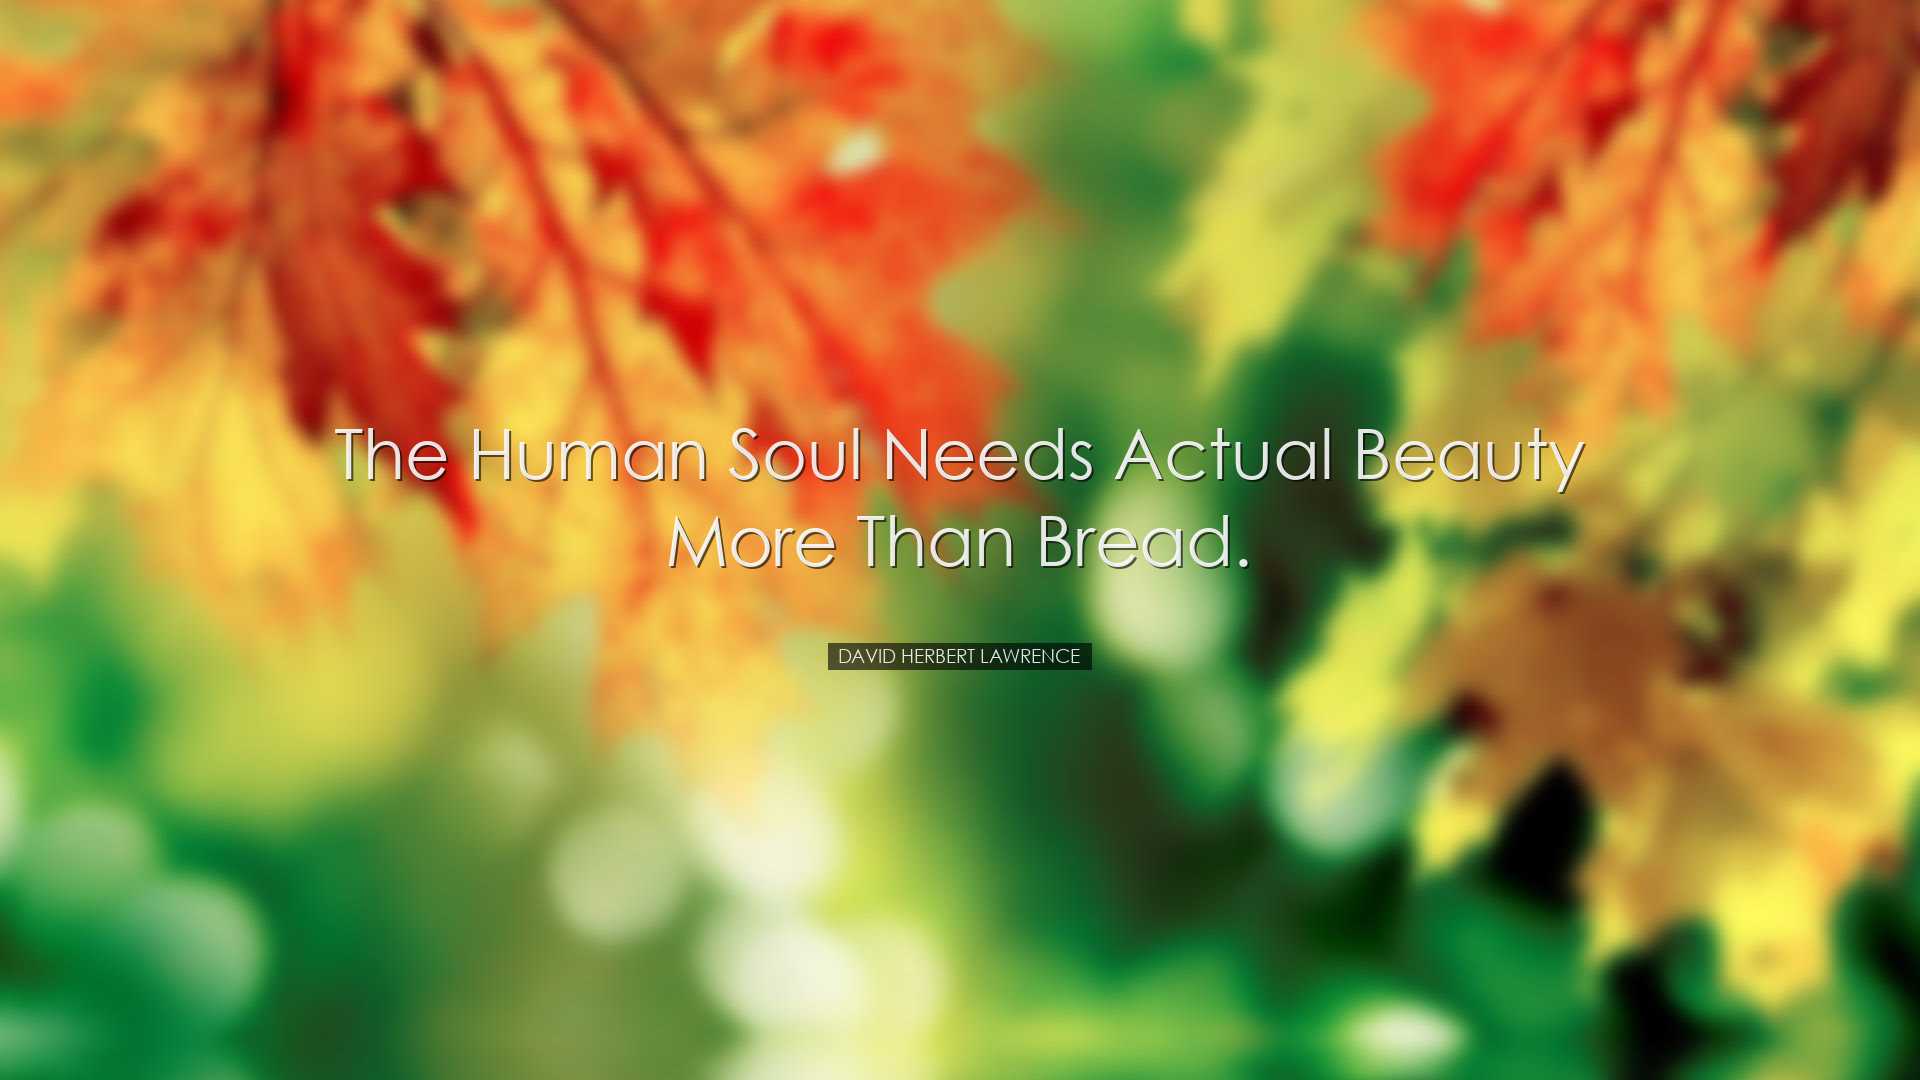 The human soul needs actual beauty more than bread. - David Herber